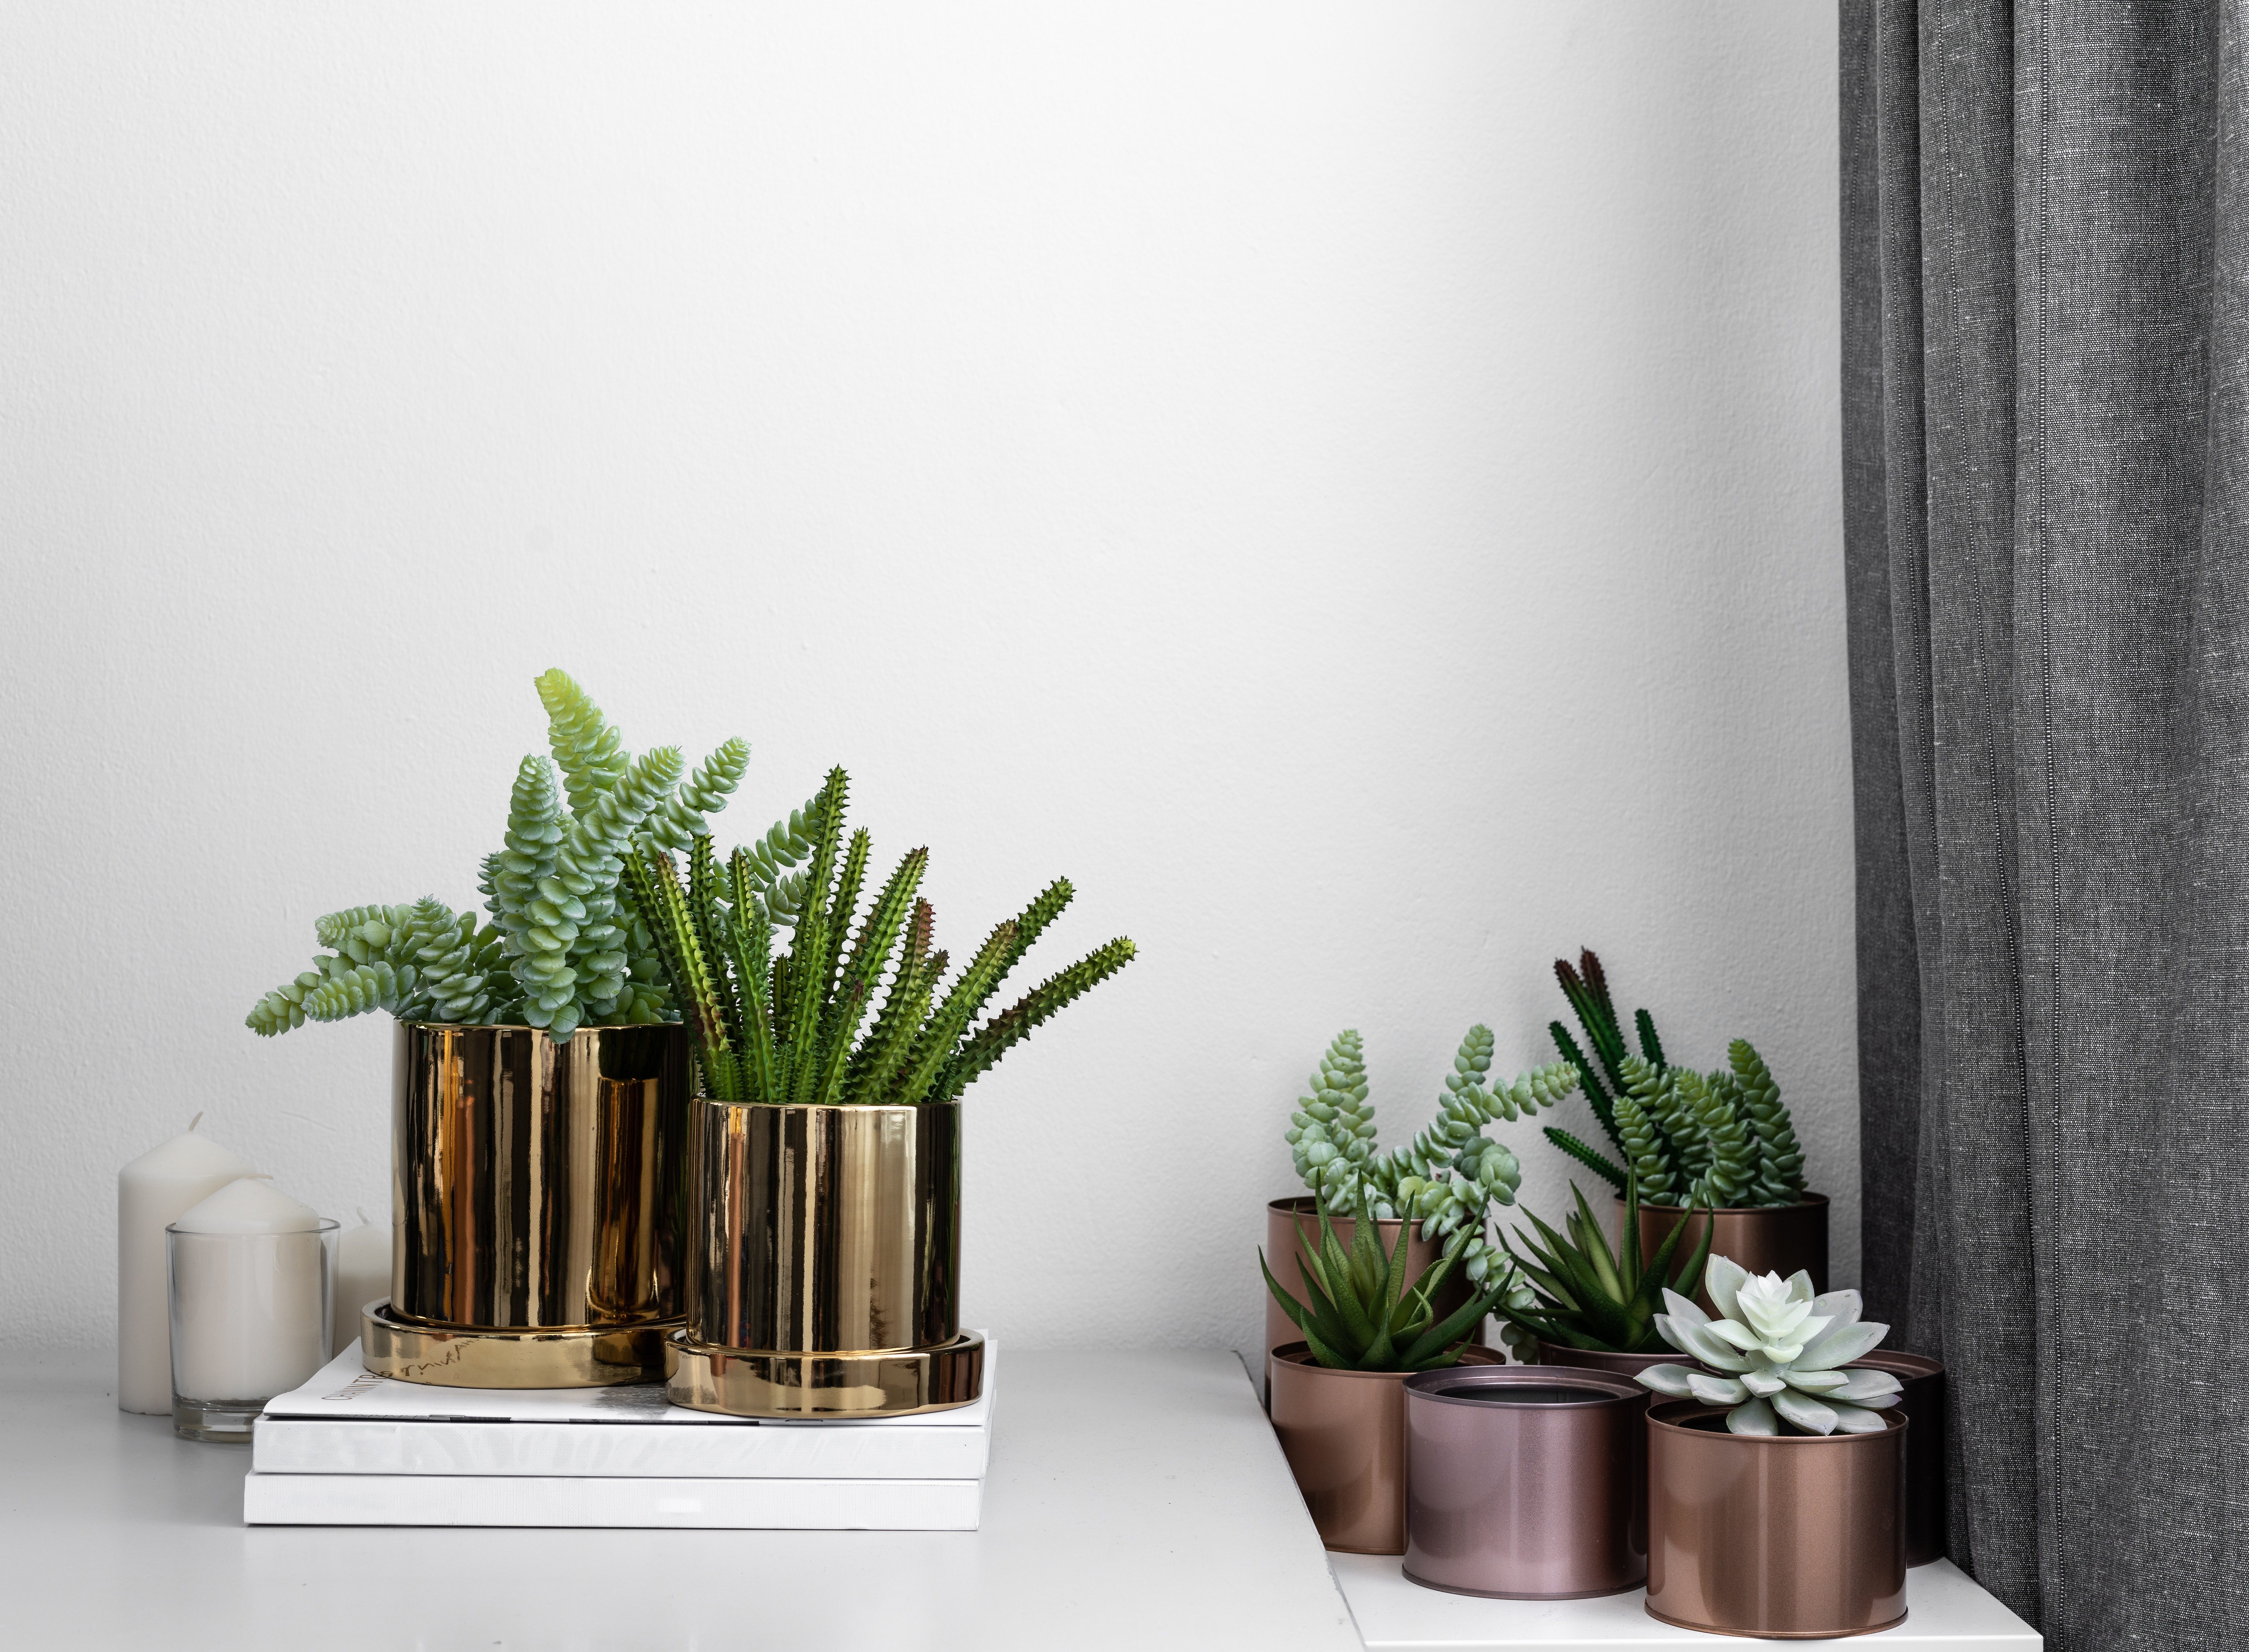 Composition of gold mirror ceramic pots with artificial plants inside setting on minimal books and group of copper aluminium pots in natural light setting scene / cozy interior concept / decoration